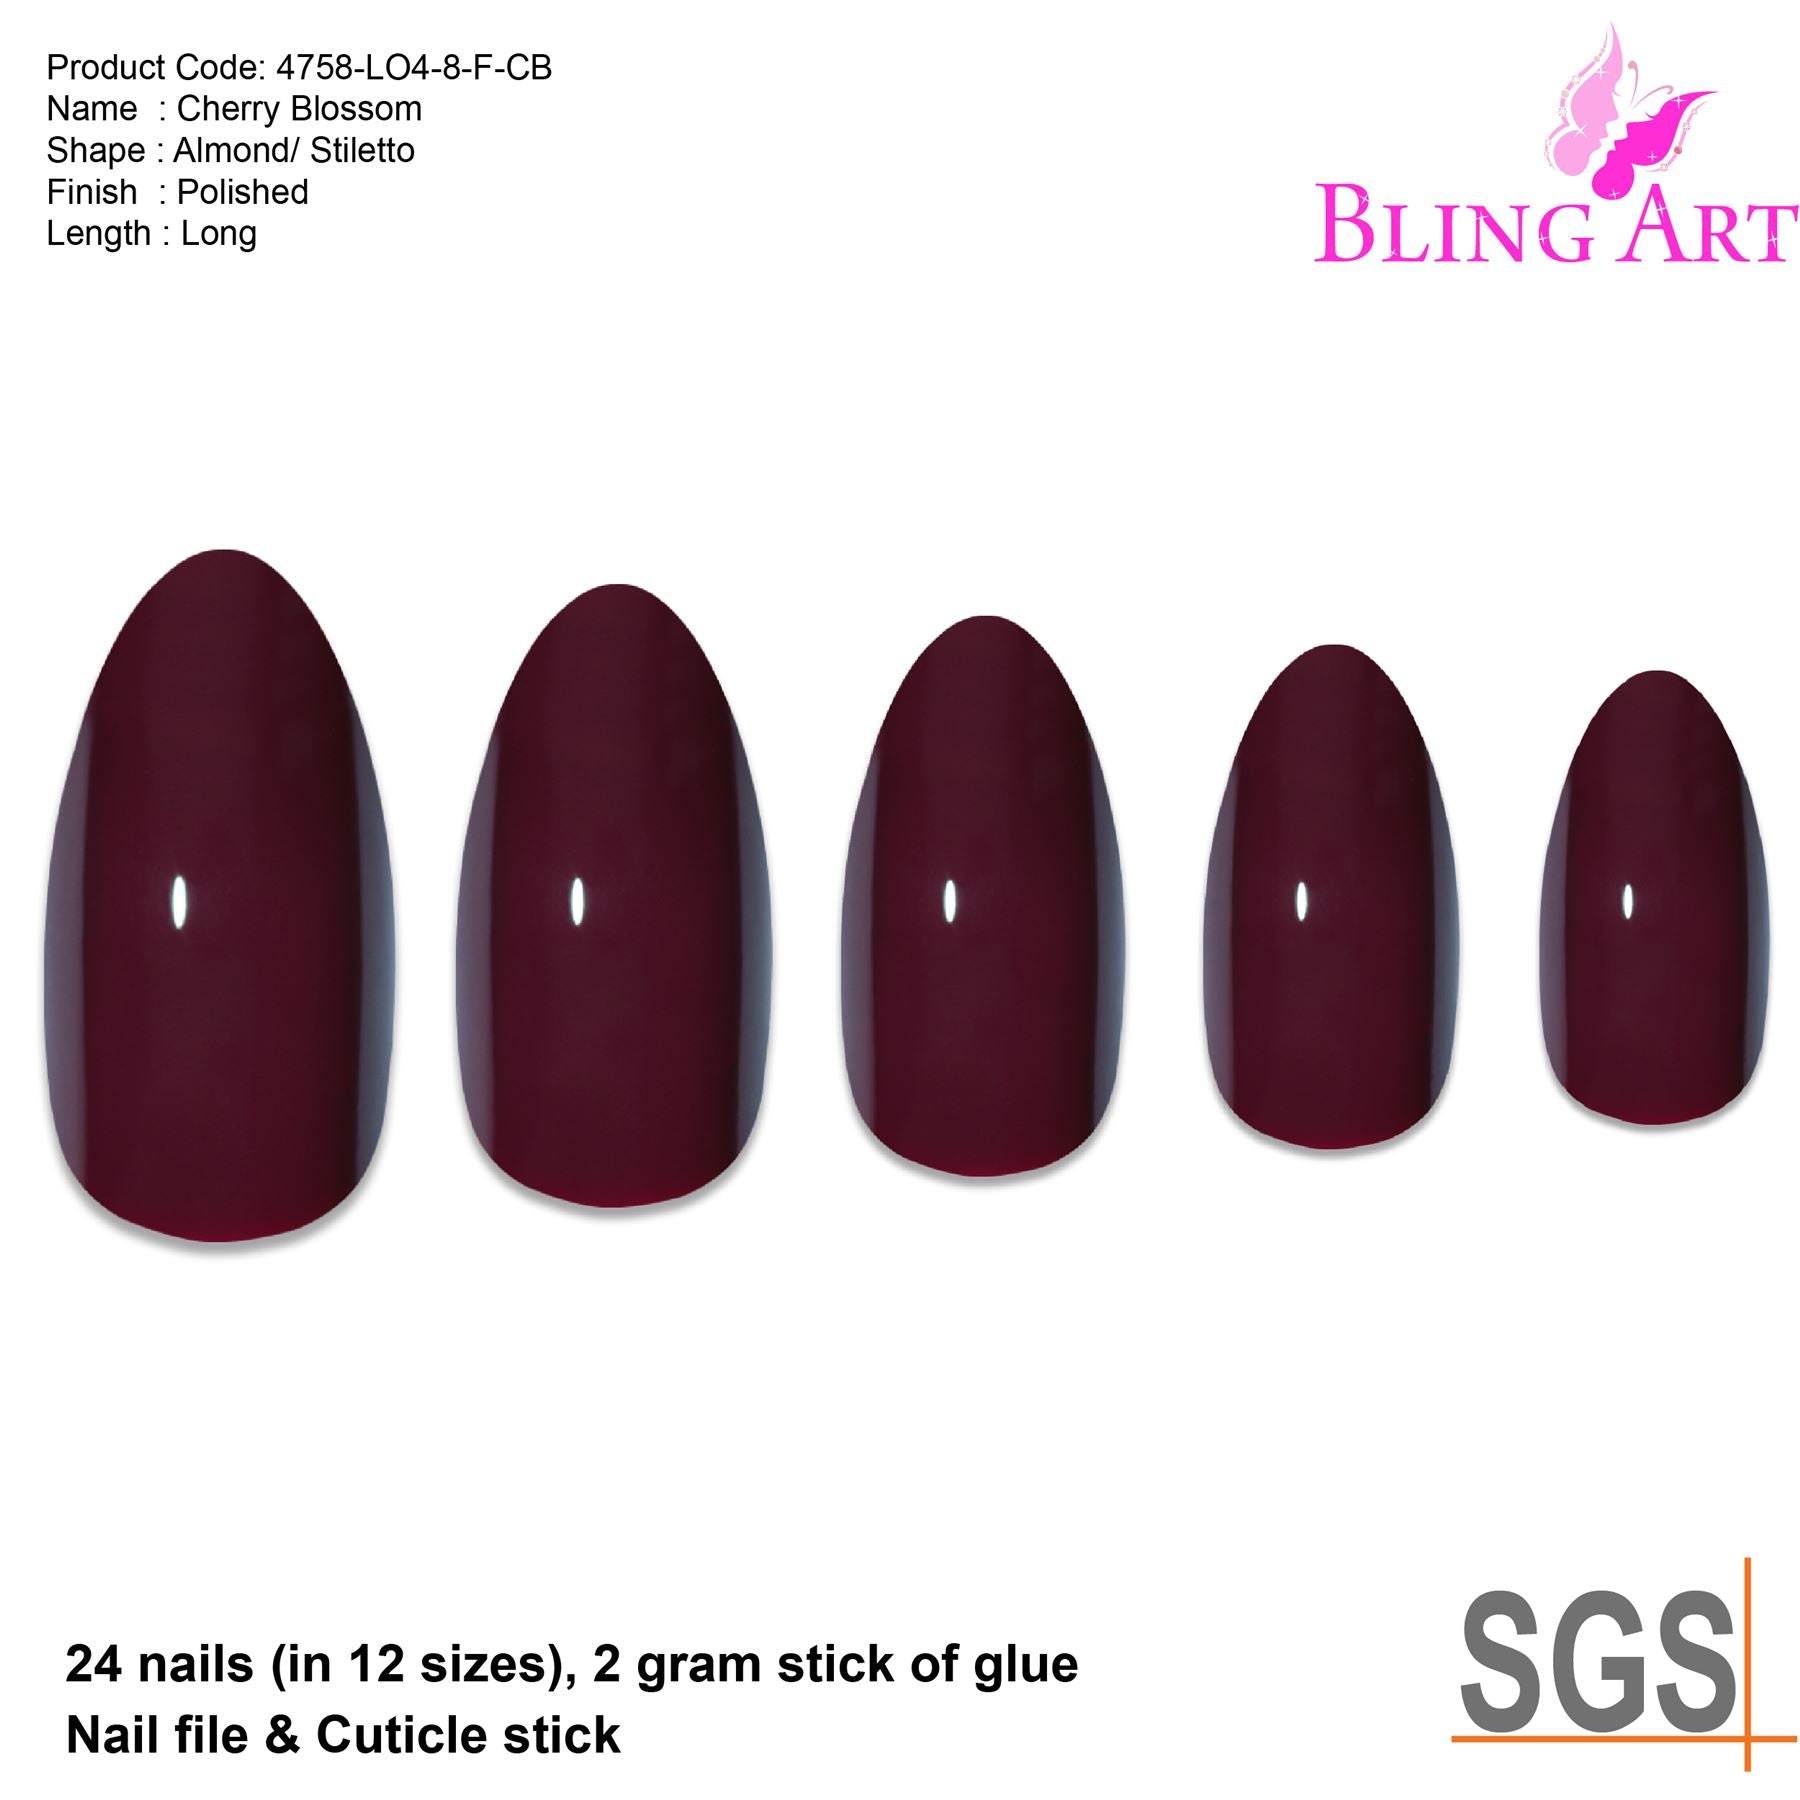 False Nails Bling Art Brown Red Almond Stiletto Long Fake Acrylic Tips with Glue